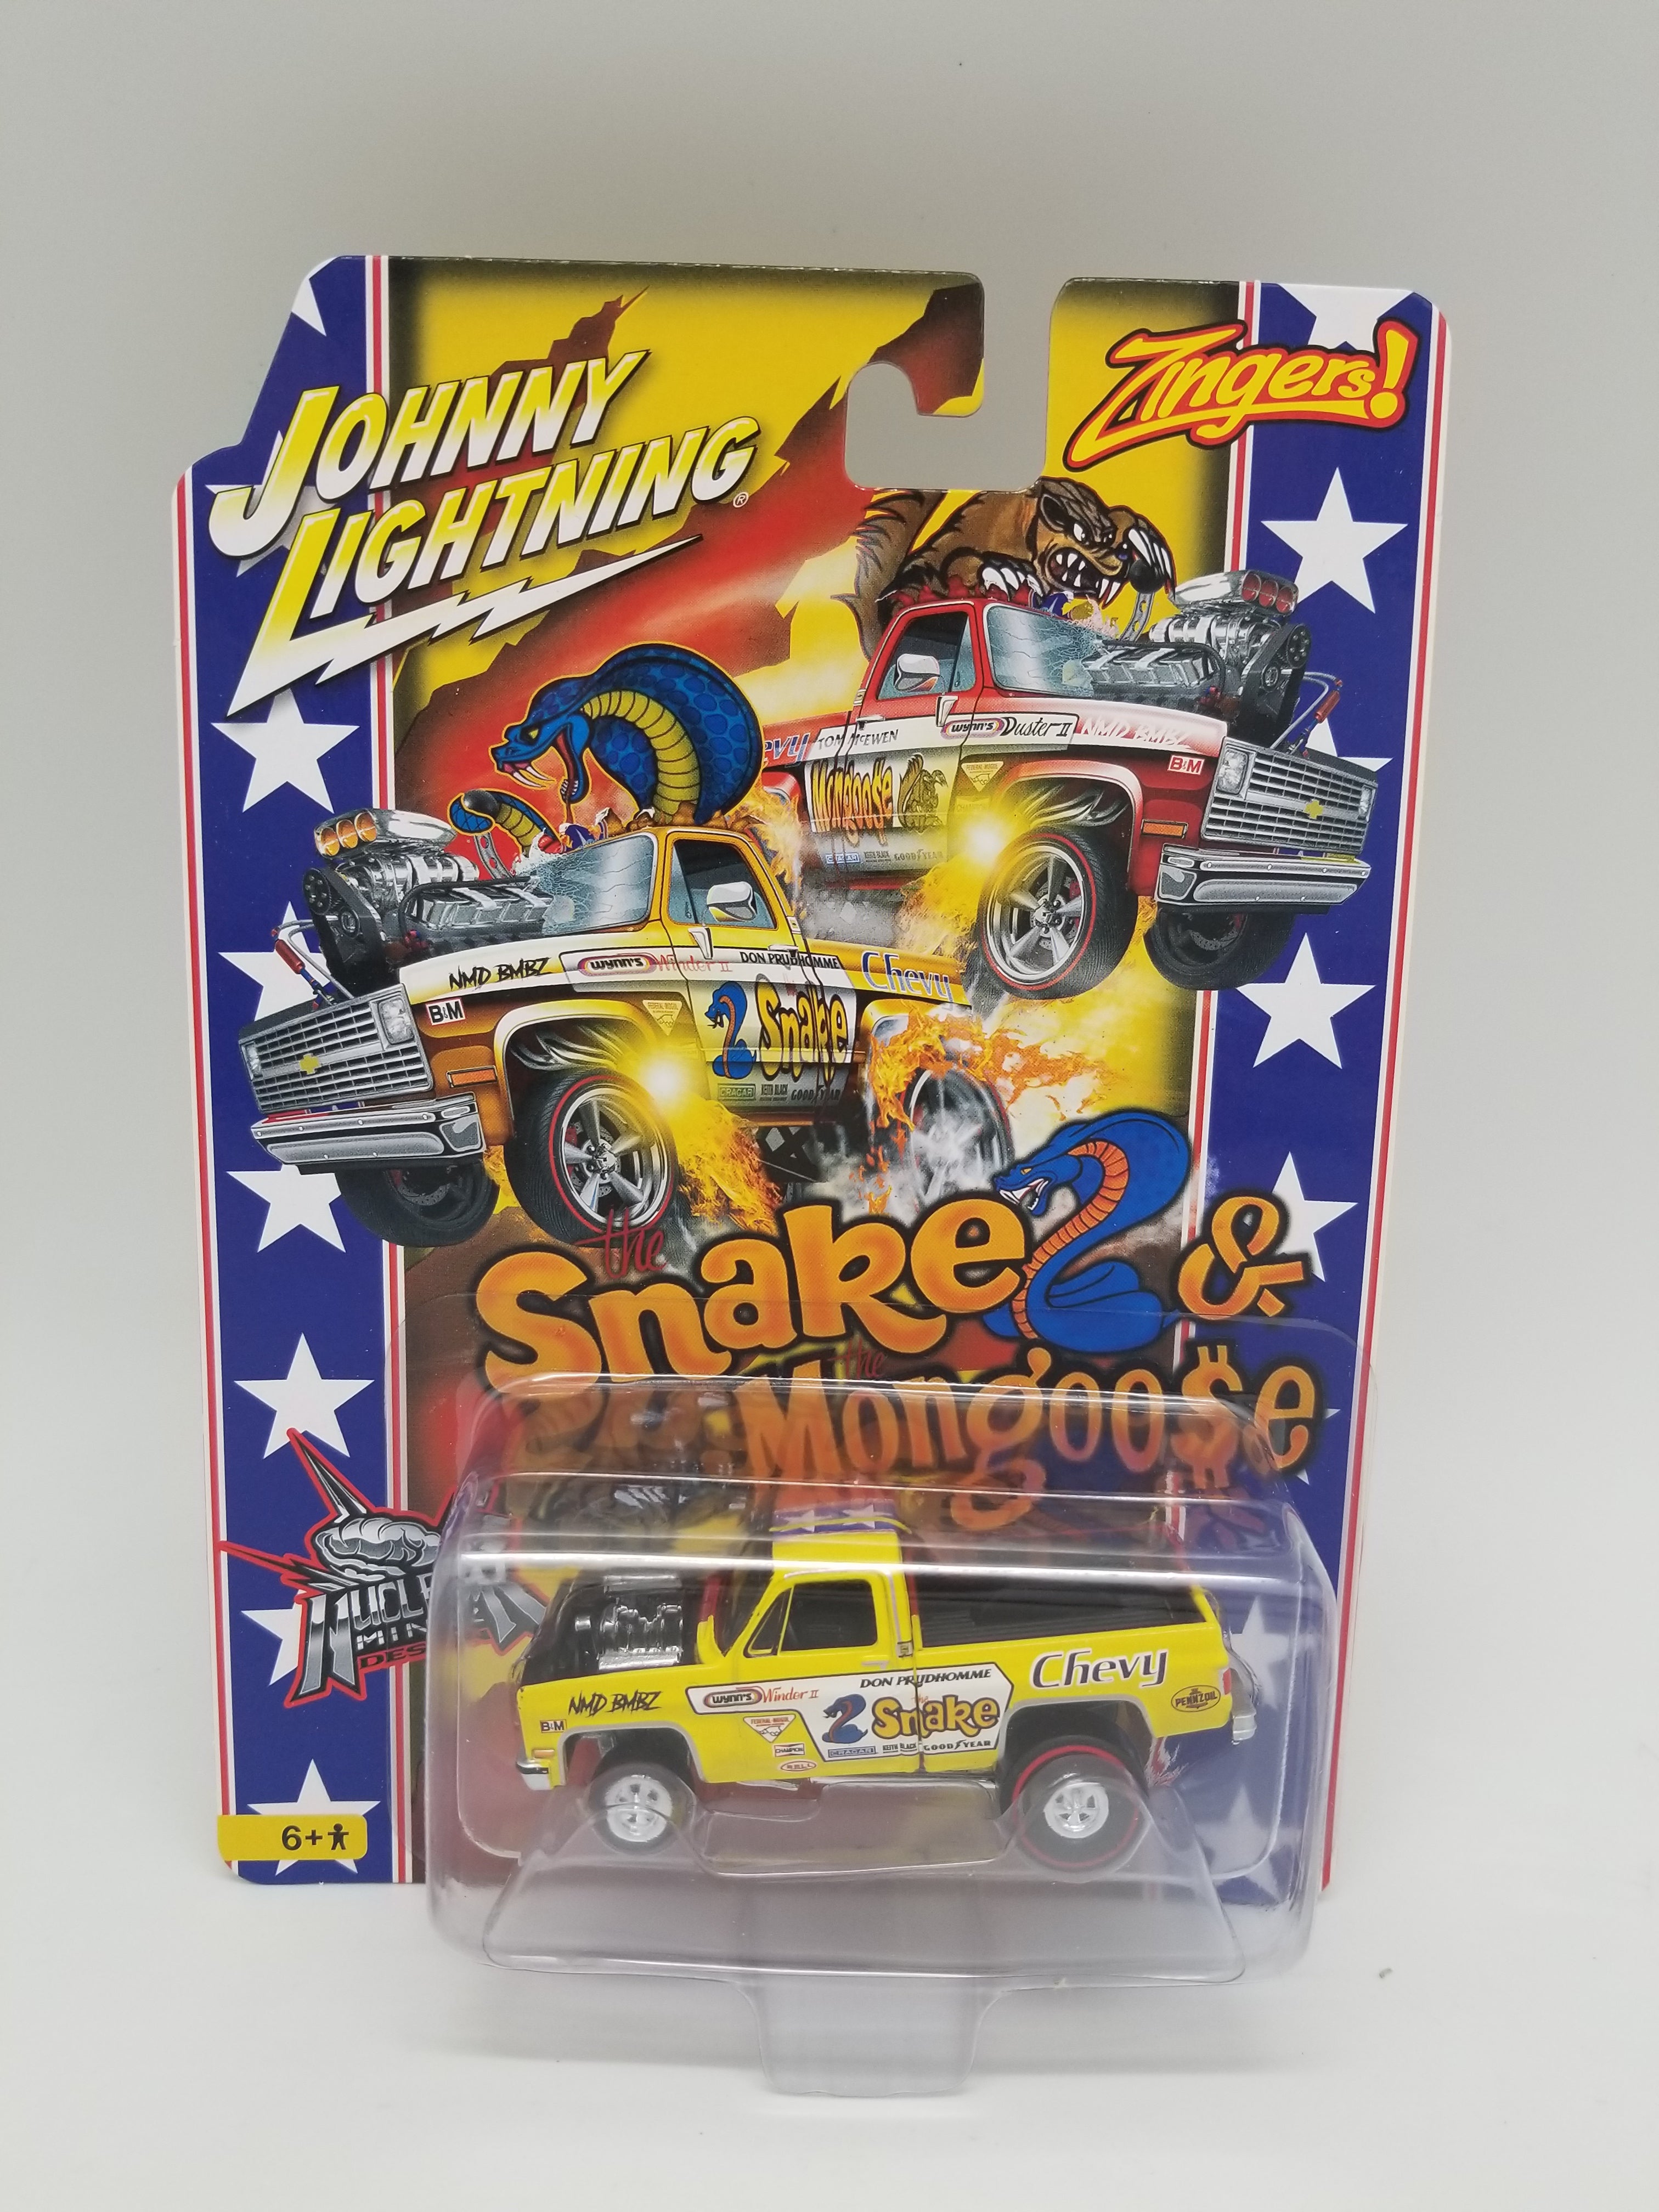 JL ZINGERS! 1980 Chevy Silverado - 50/50 SNAKE and MONGOOSE